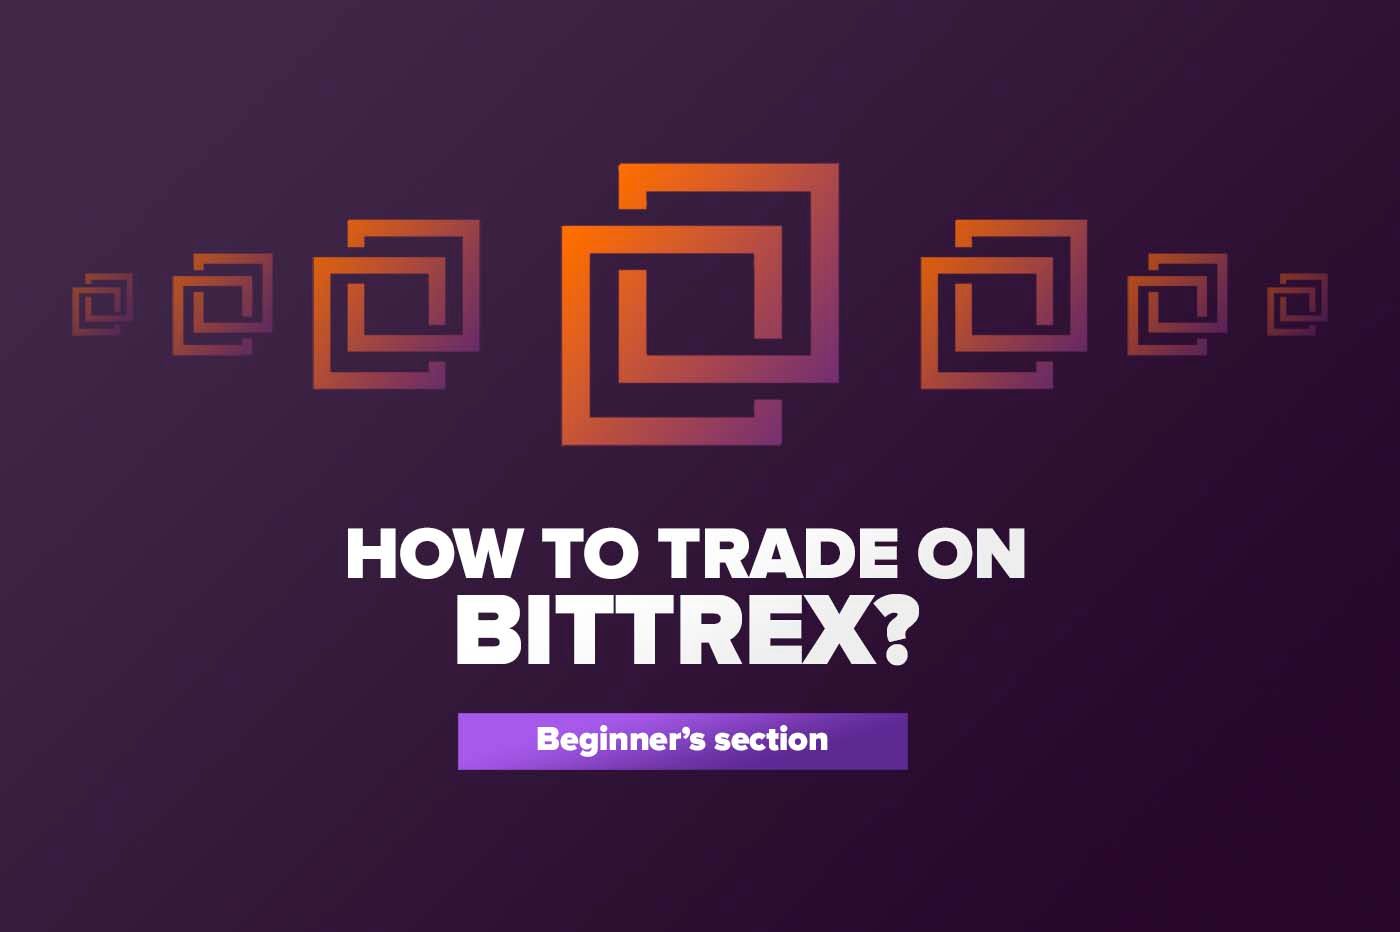 How to trade on Bittrex?